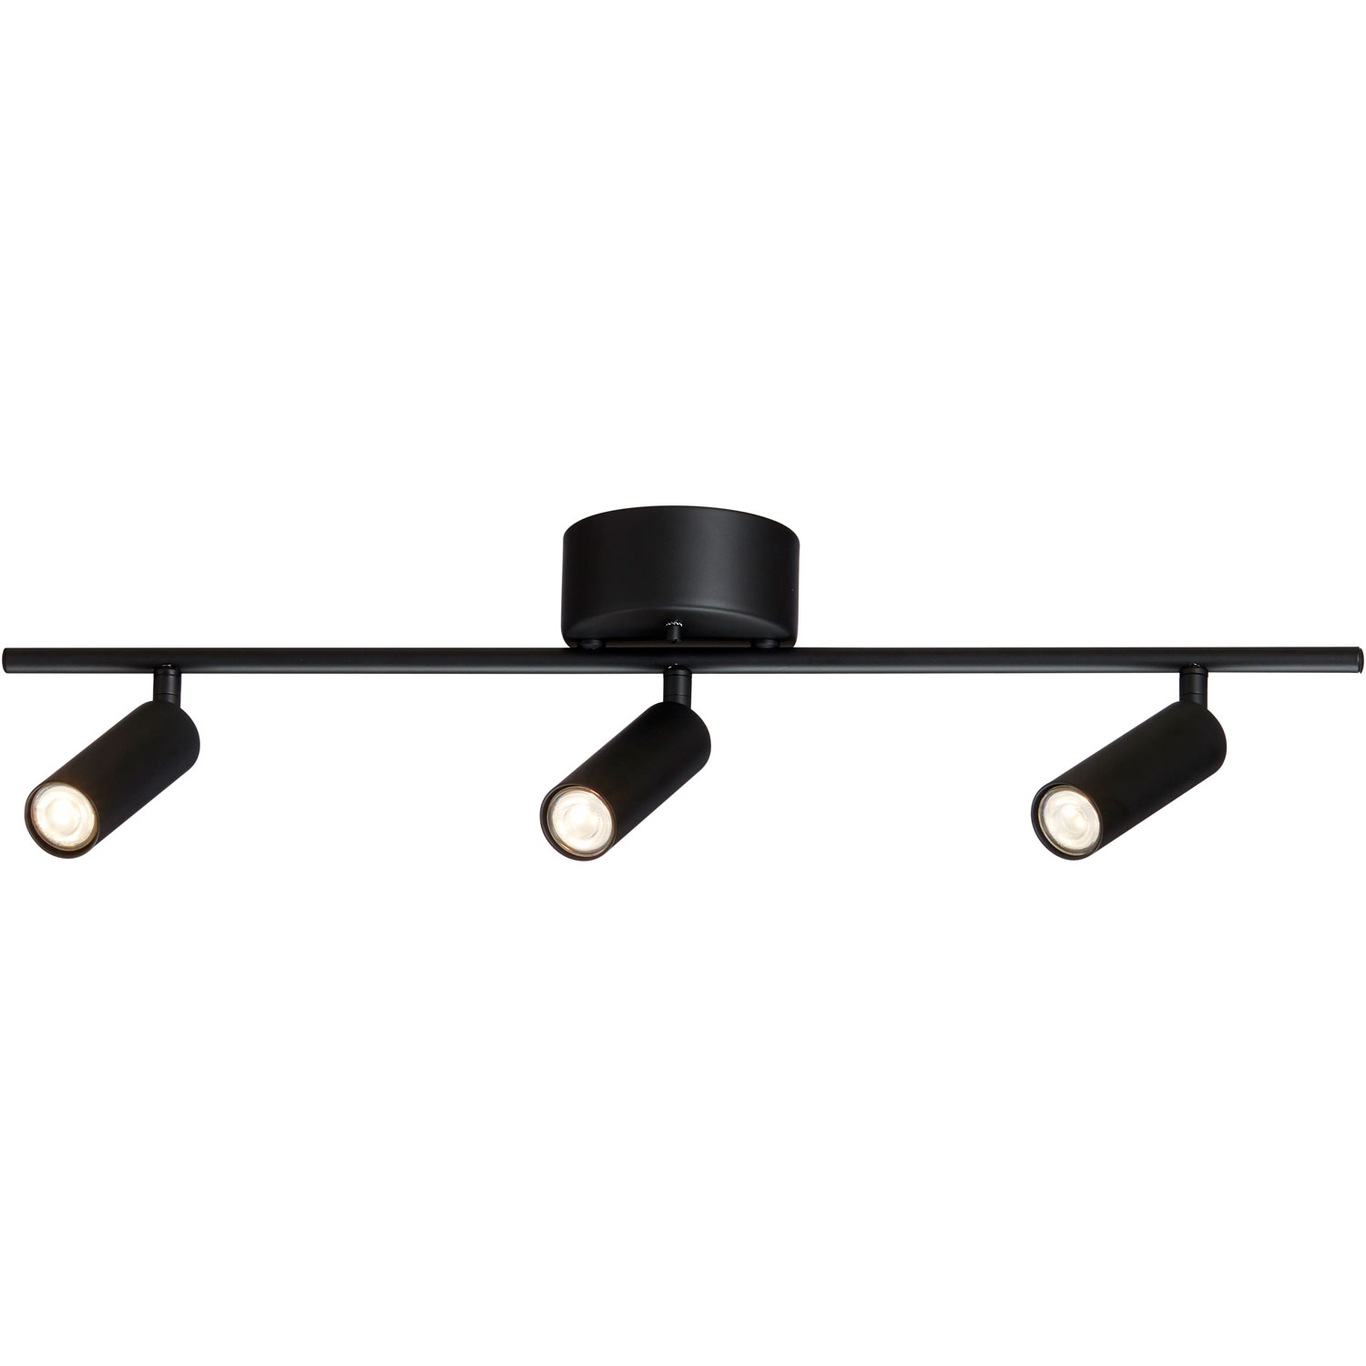 CATO SLIM TRACK 3 SPOTS wall - ceiling lamp